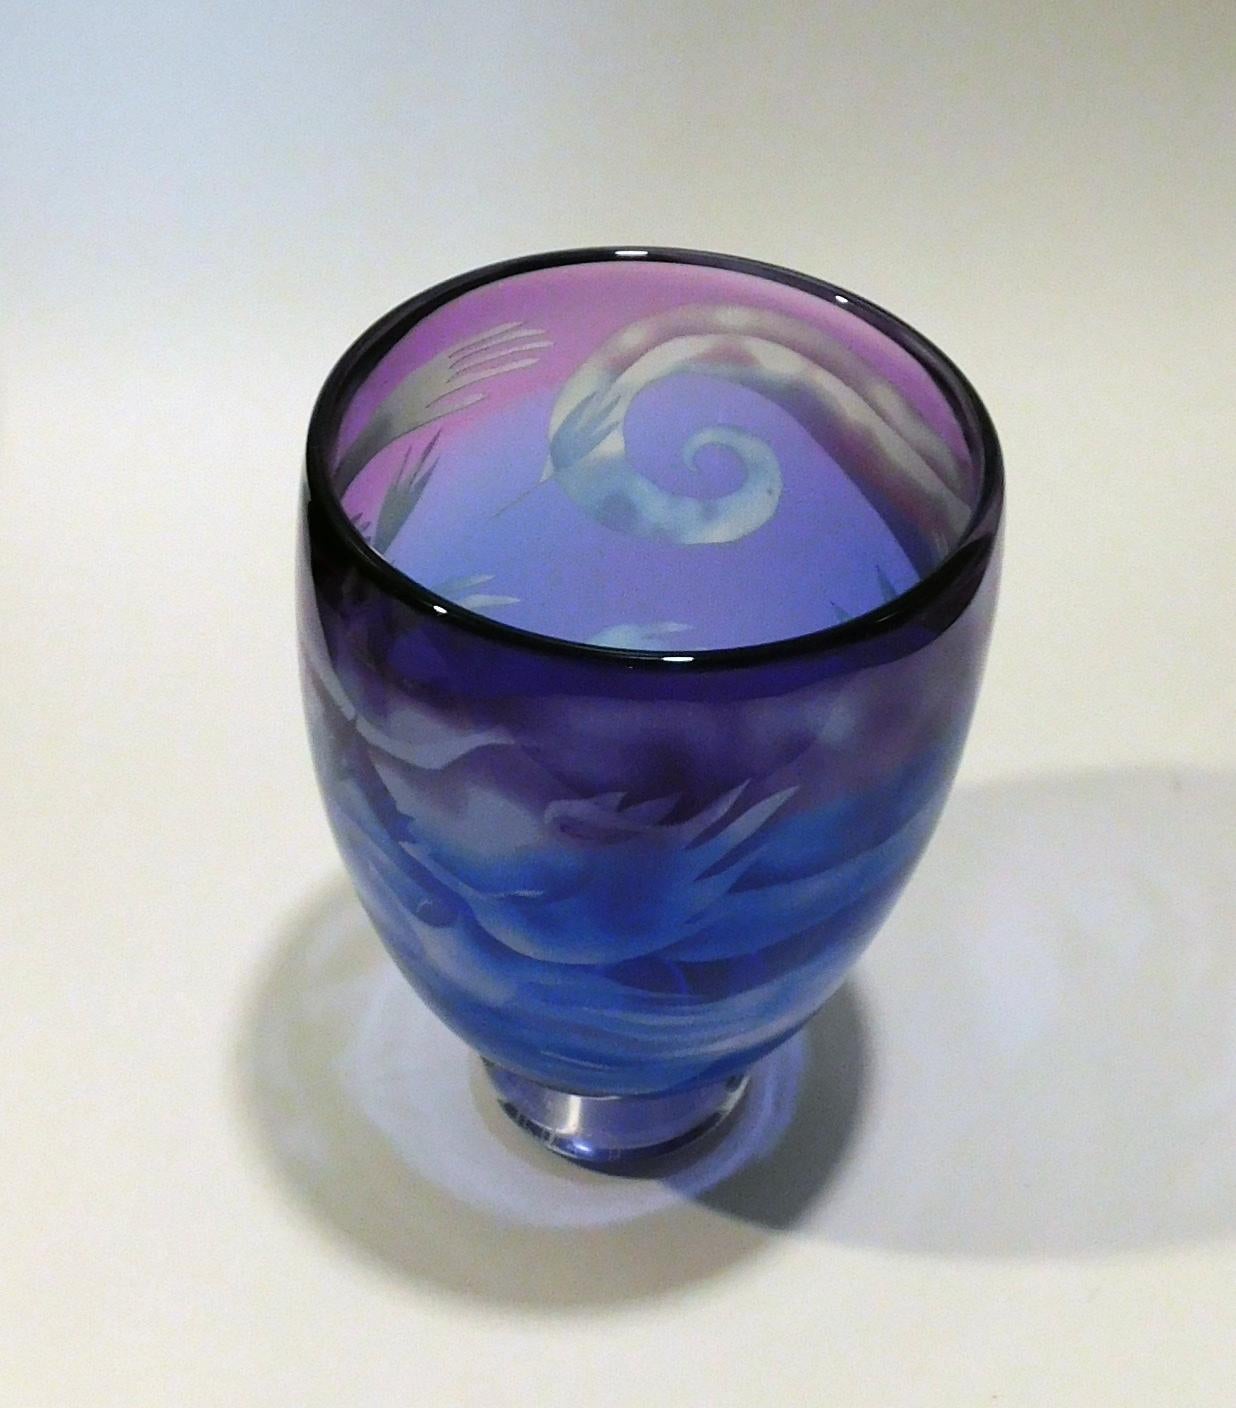 This beautiful cameo glass vase signed by the artist measures 9